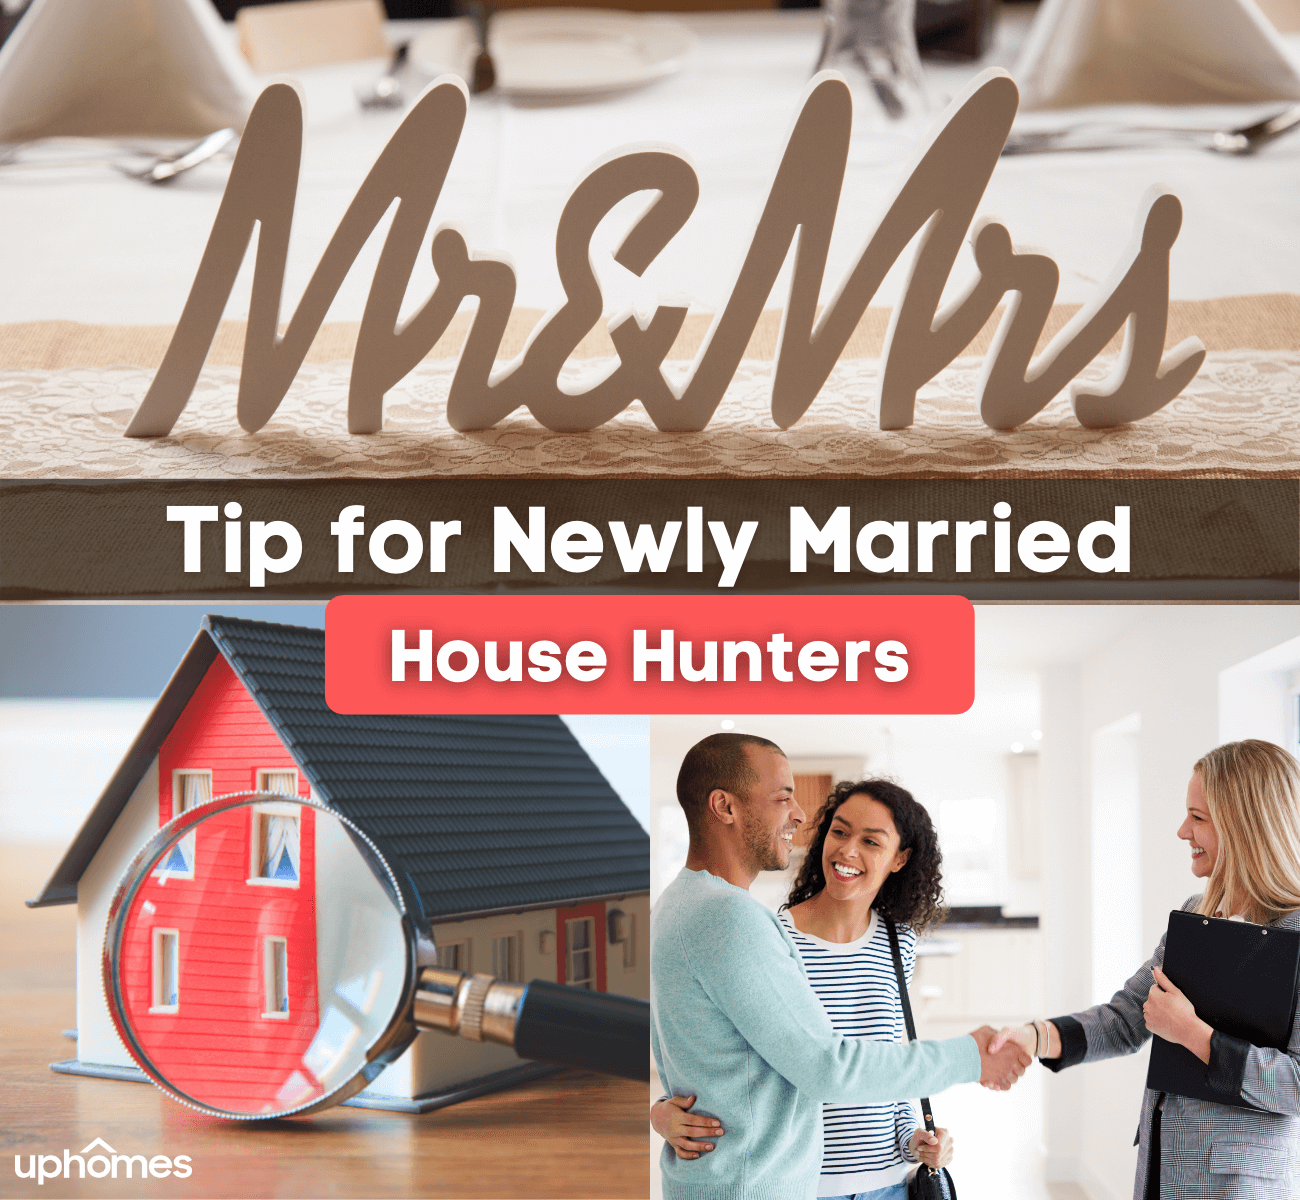 Tips for Newly Married House Hunters